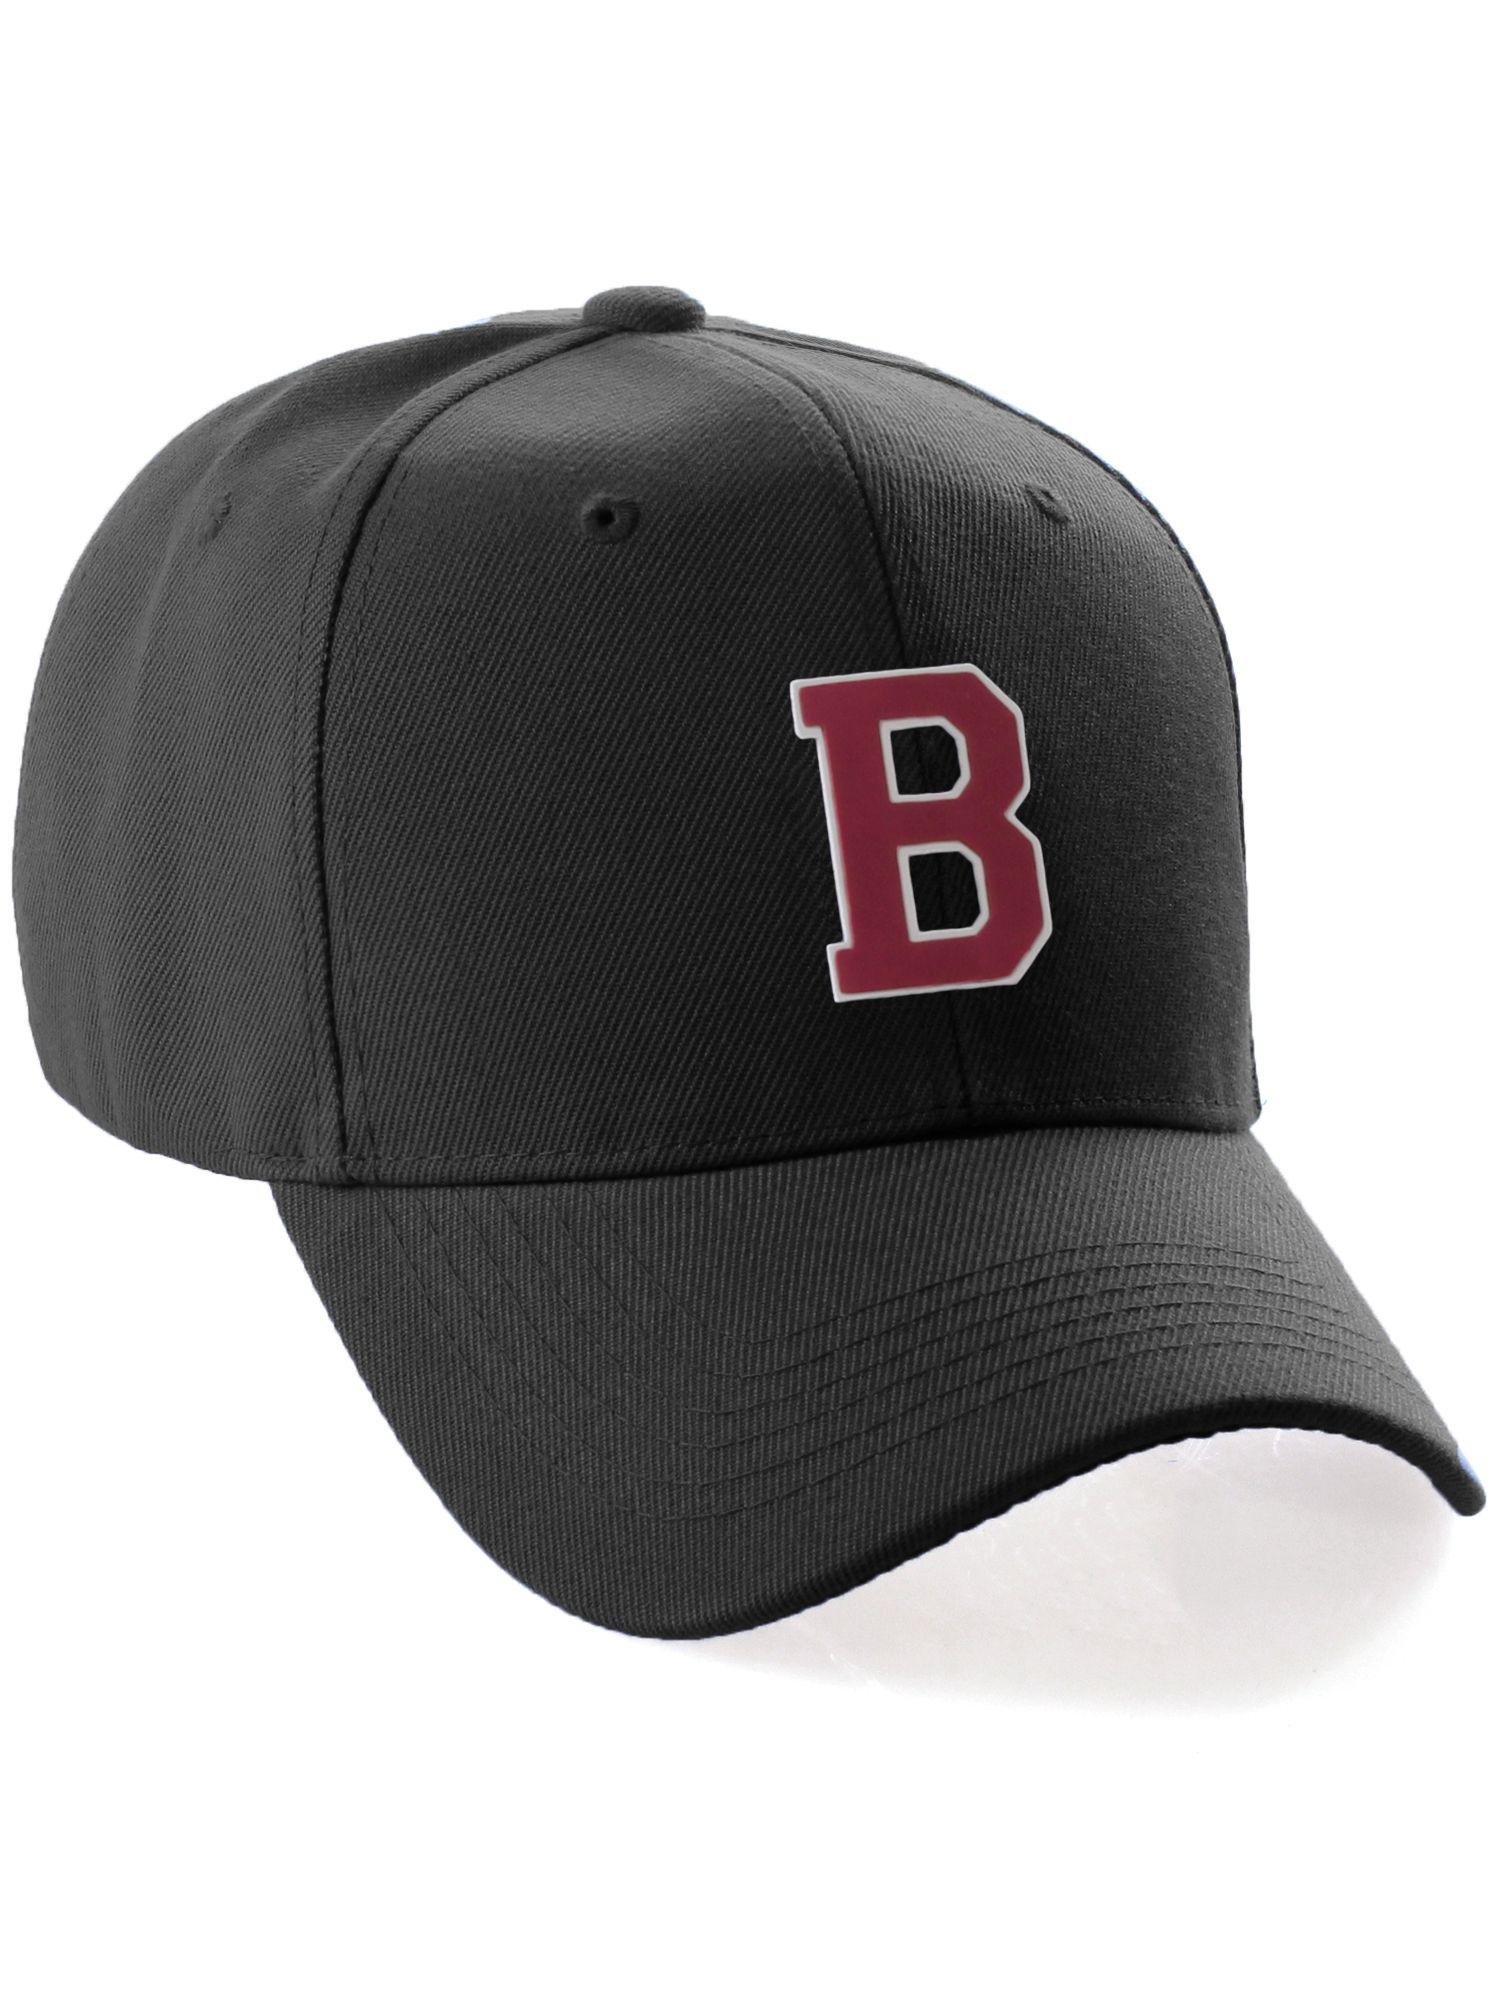 Black White with Red Letters Logo - Custom A Z Initial Letters Baseball Hat Cap Hat With White